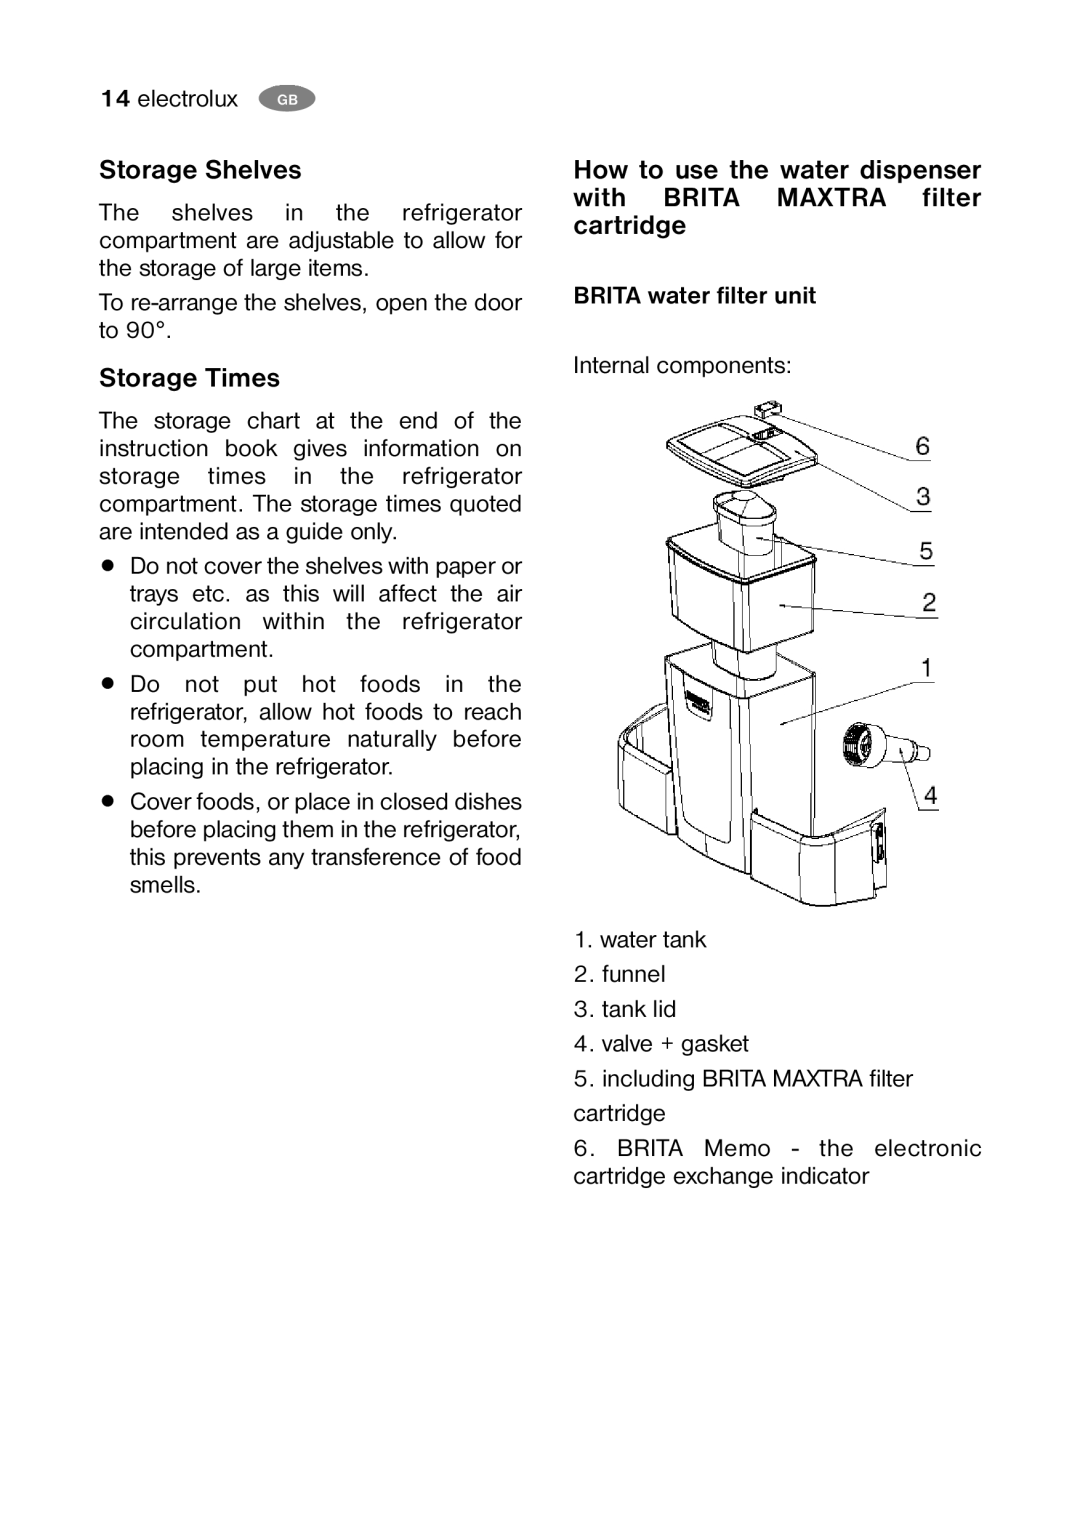 Electrolux ENB 35405 W Storage Shelves, Storage Times, How to use the water dispenser with BRITA MAXTRA filter cartridge 